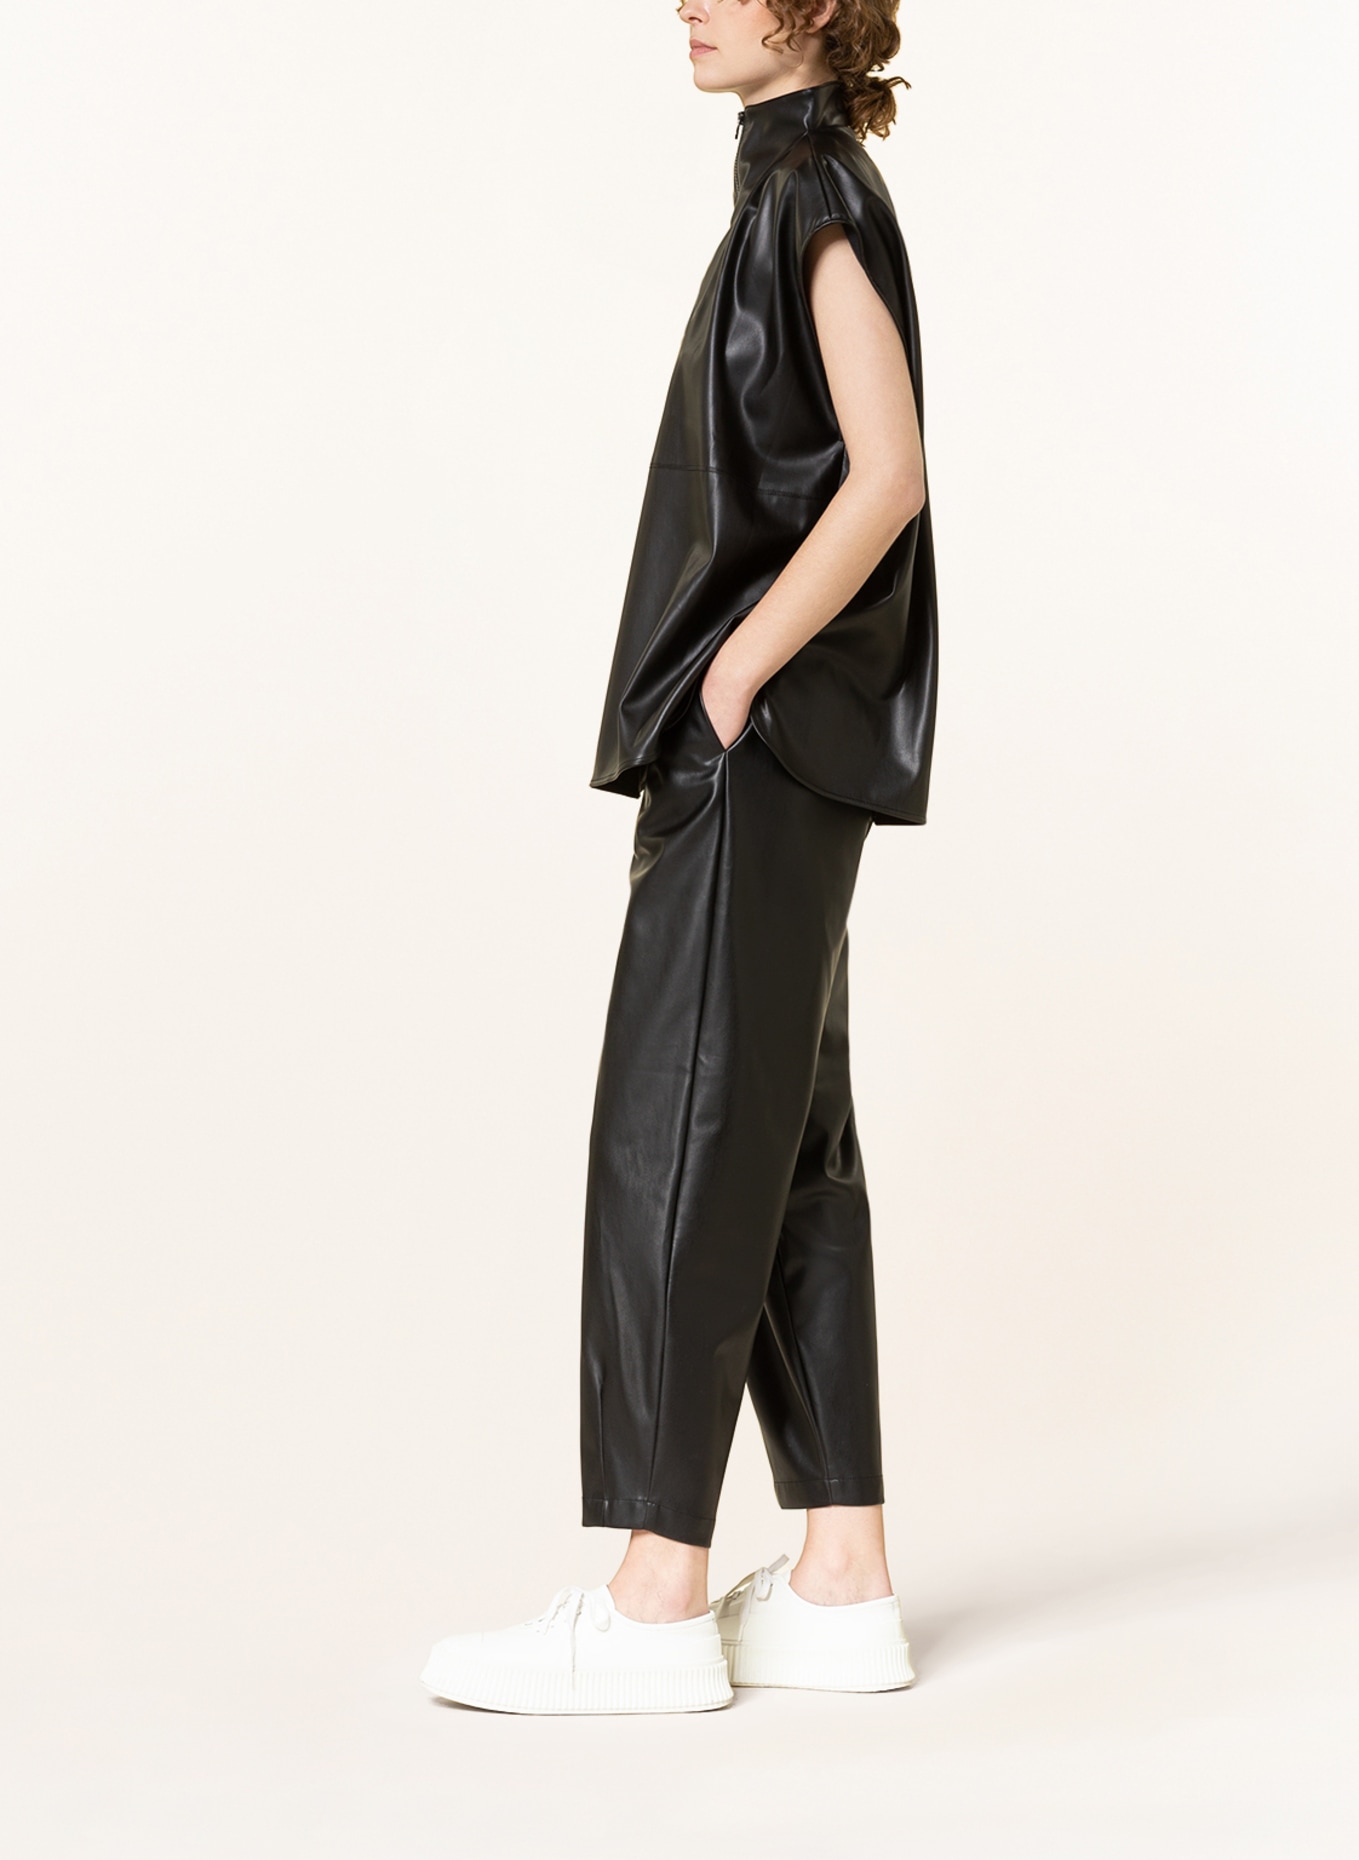 KARO KAUER 7/8 trousers in leather look, Color: BLACK (Image 4)